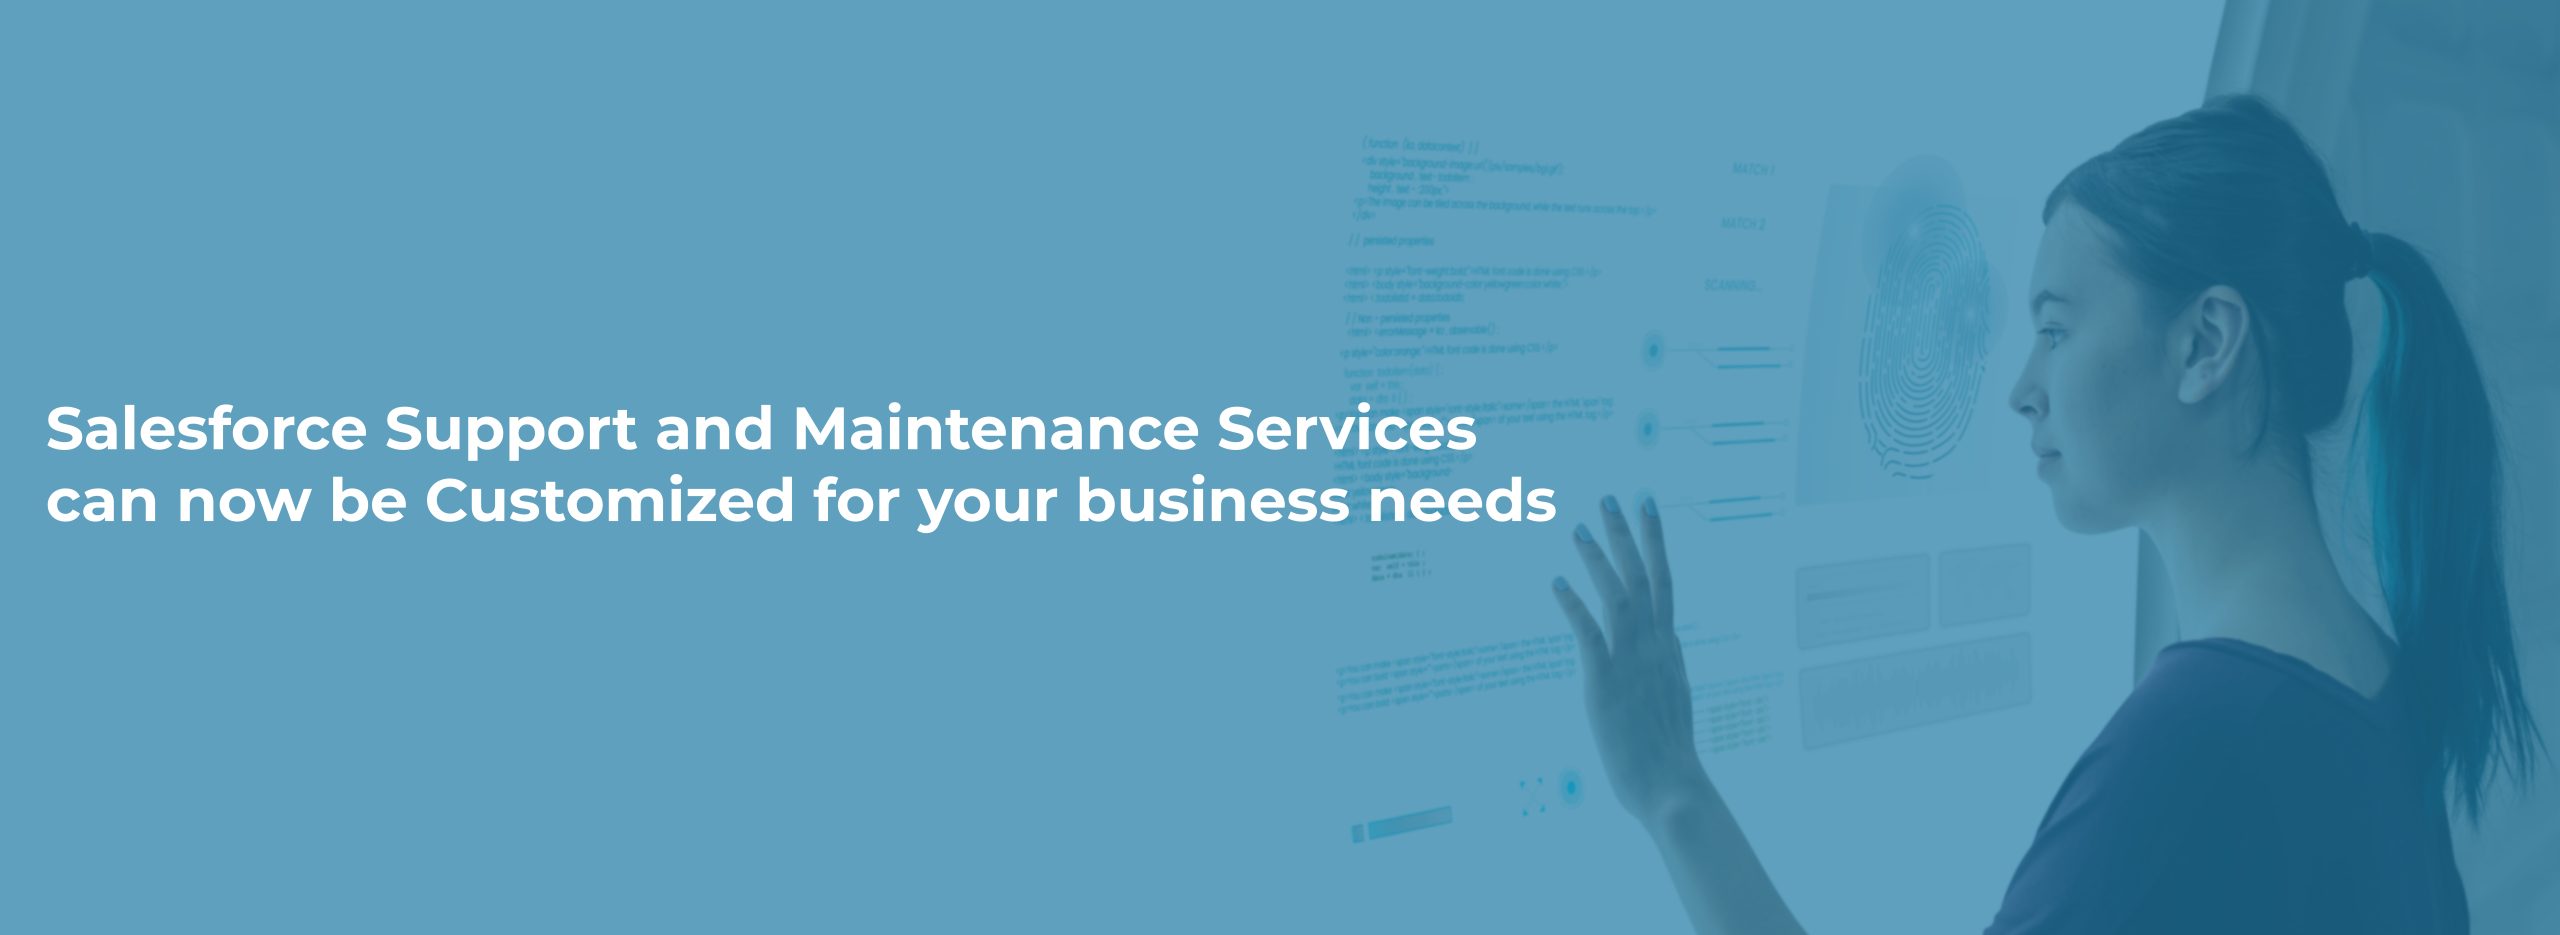 Salesforce Support and Maintenance Services can now be Customized for your business needs